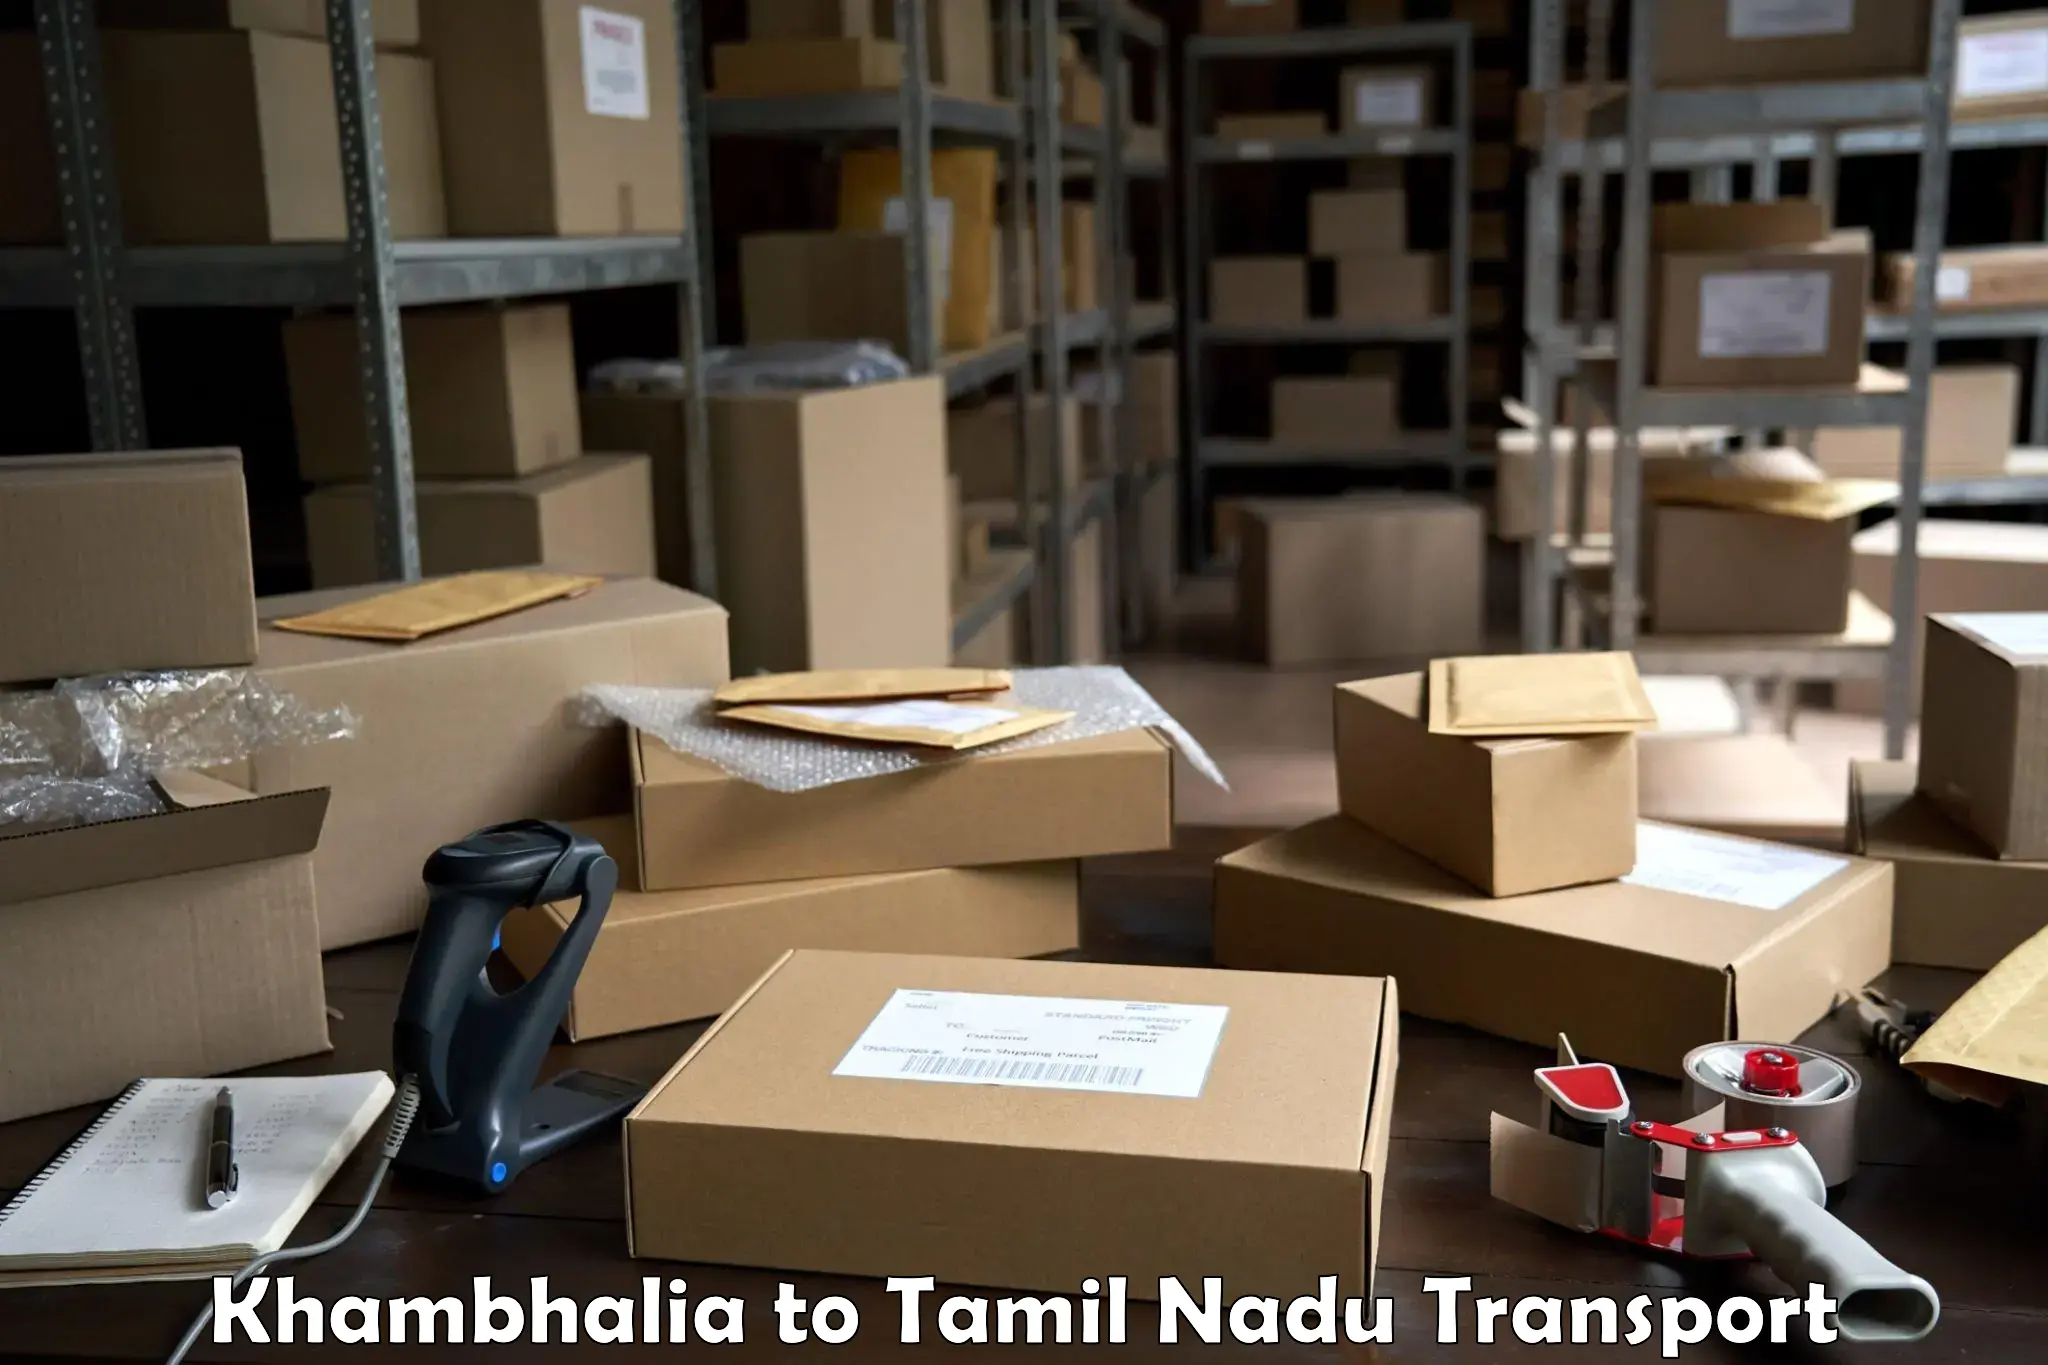 Online transport service Khambhalia to Meenakshi Academy of Higher Education and Research Chennai